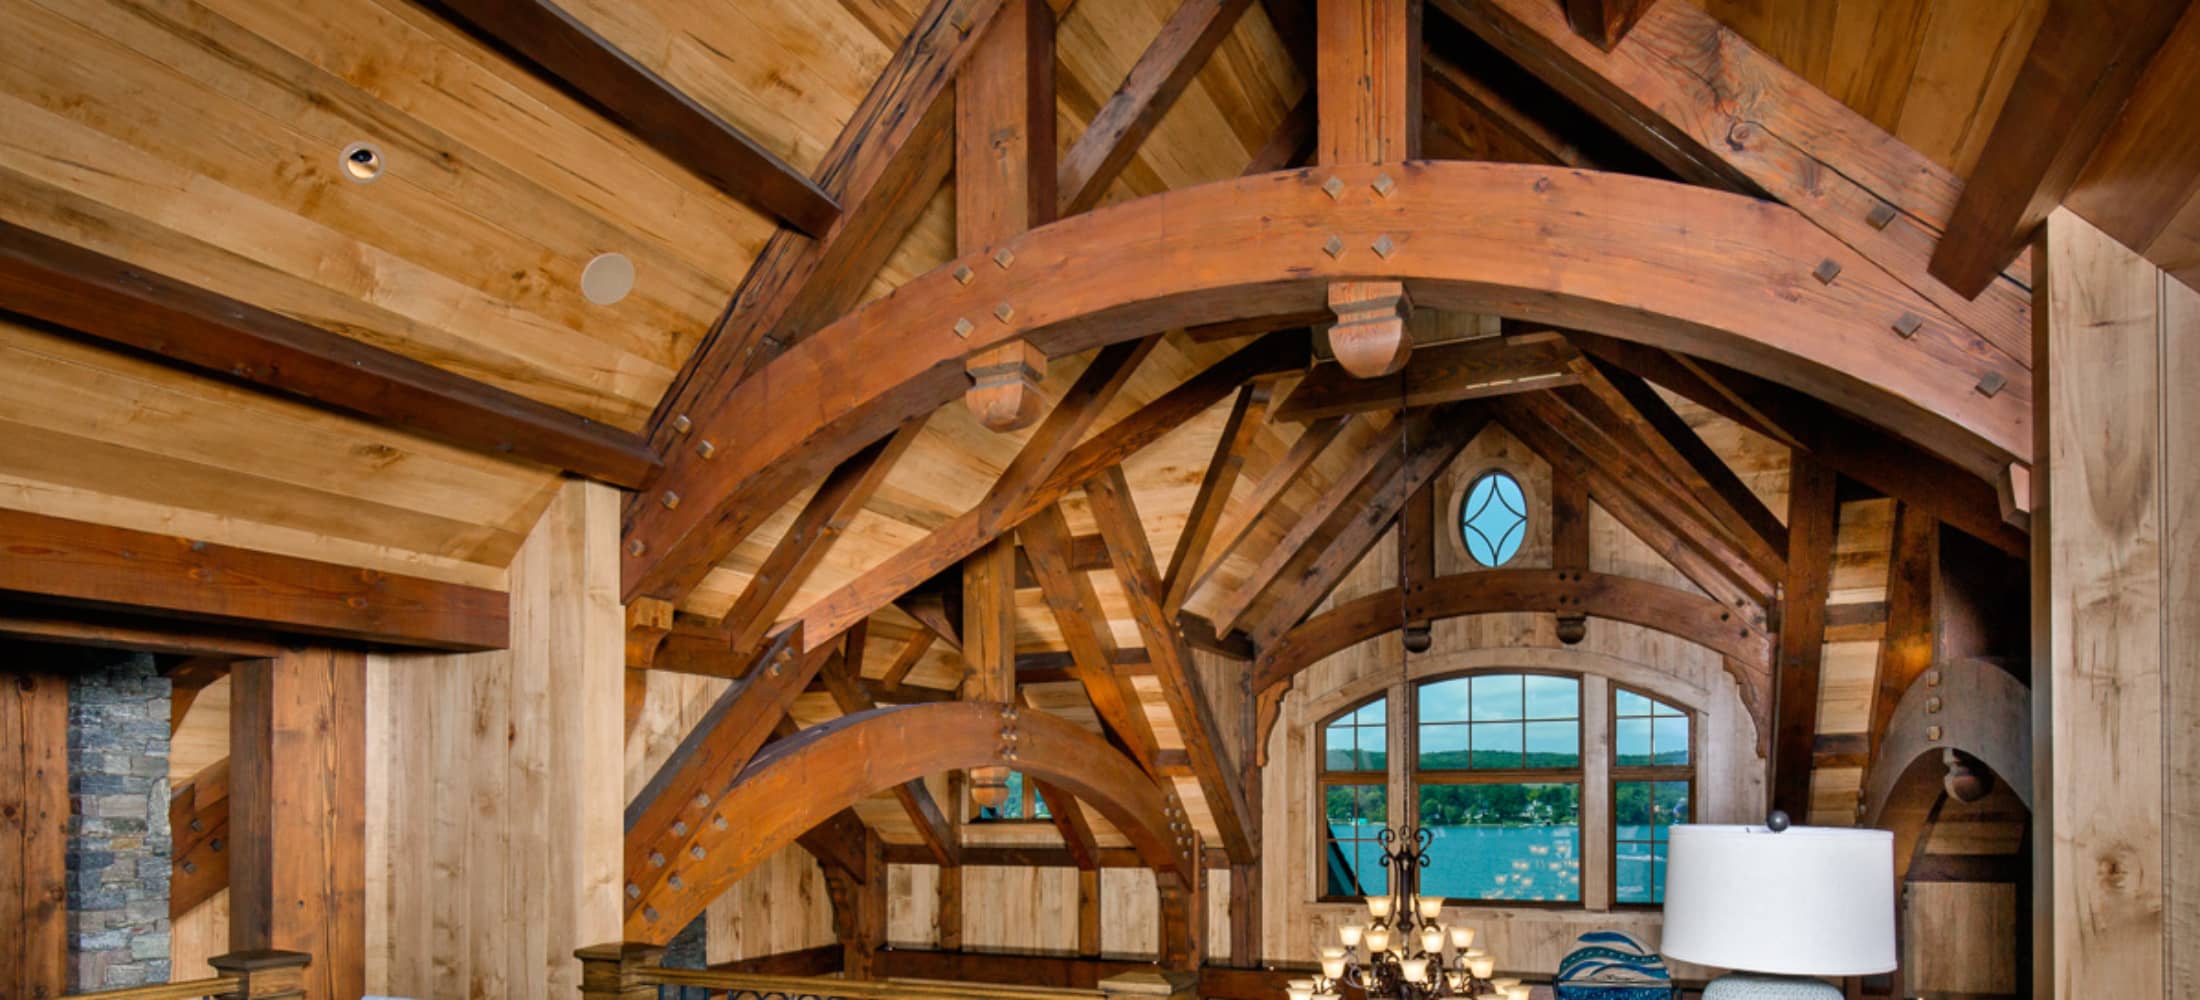 timber frame with curved trusses in home